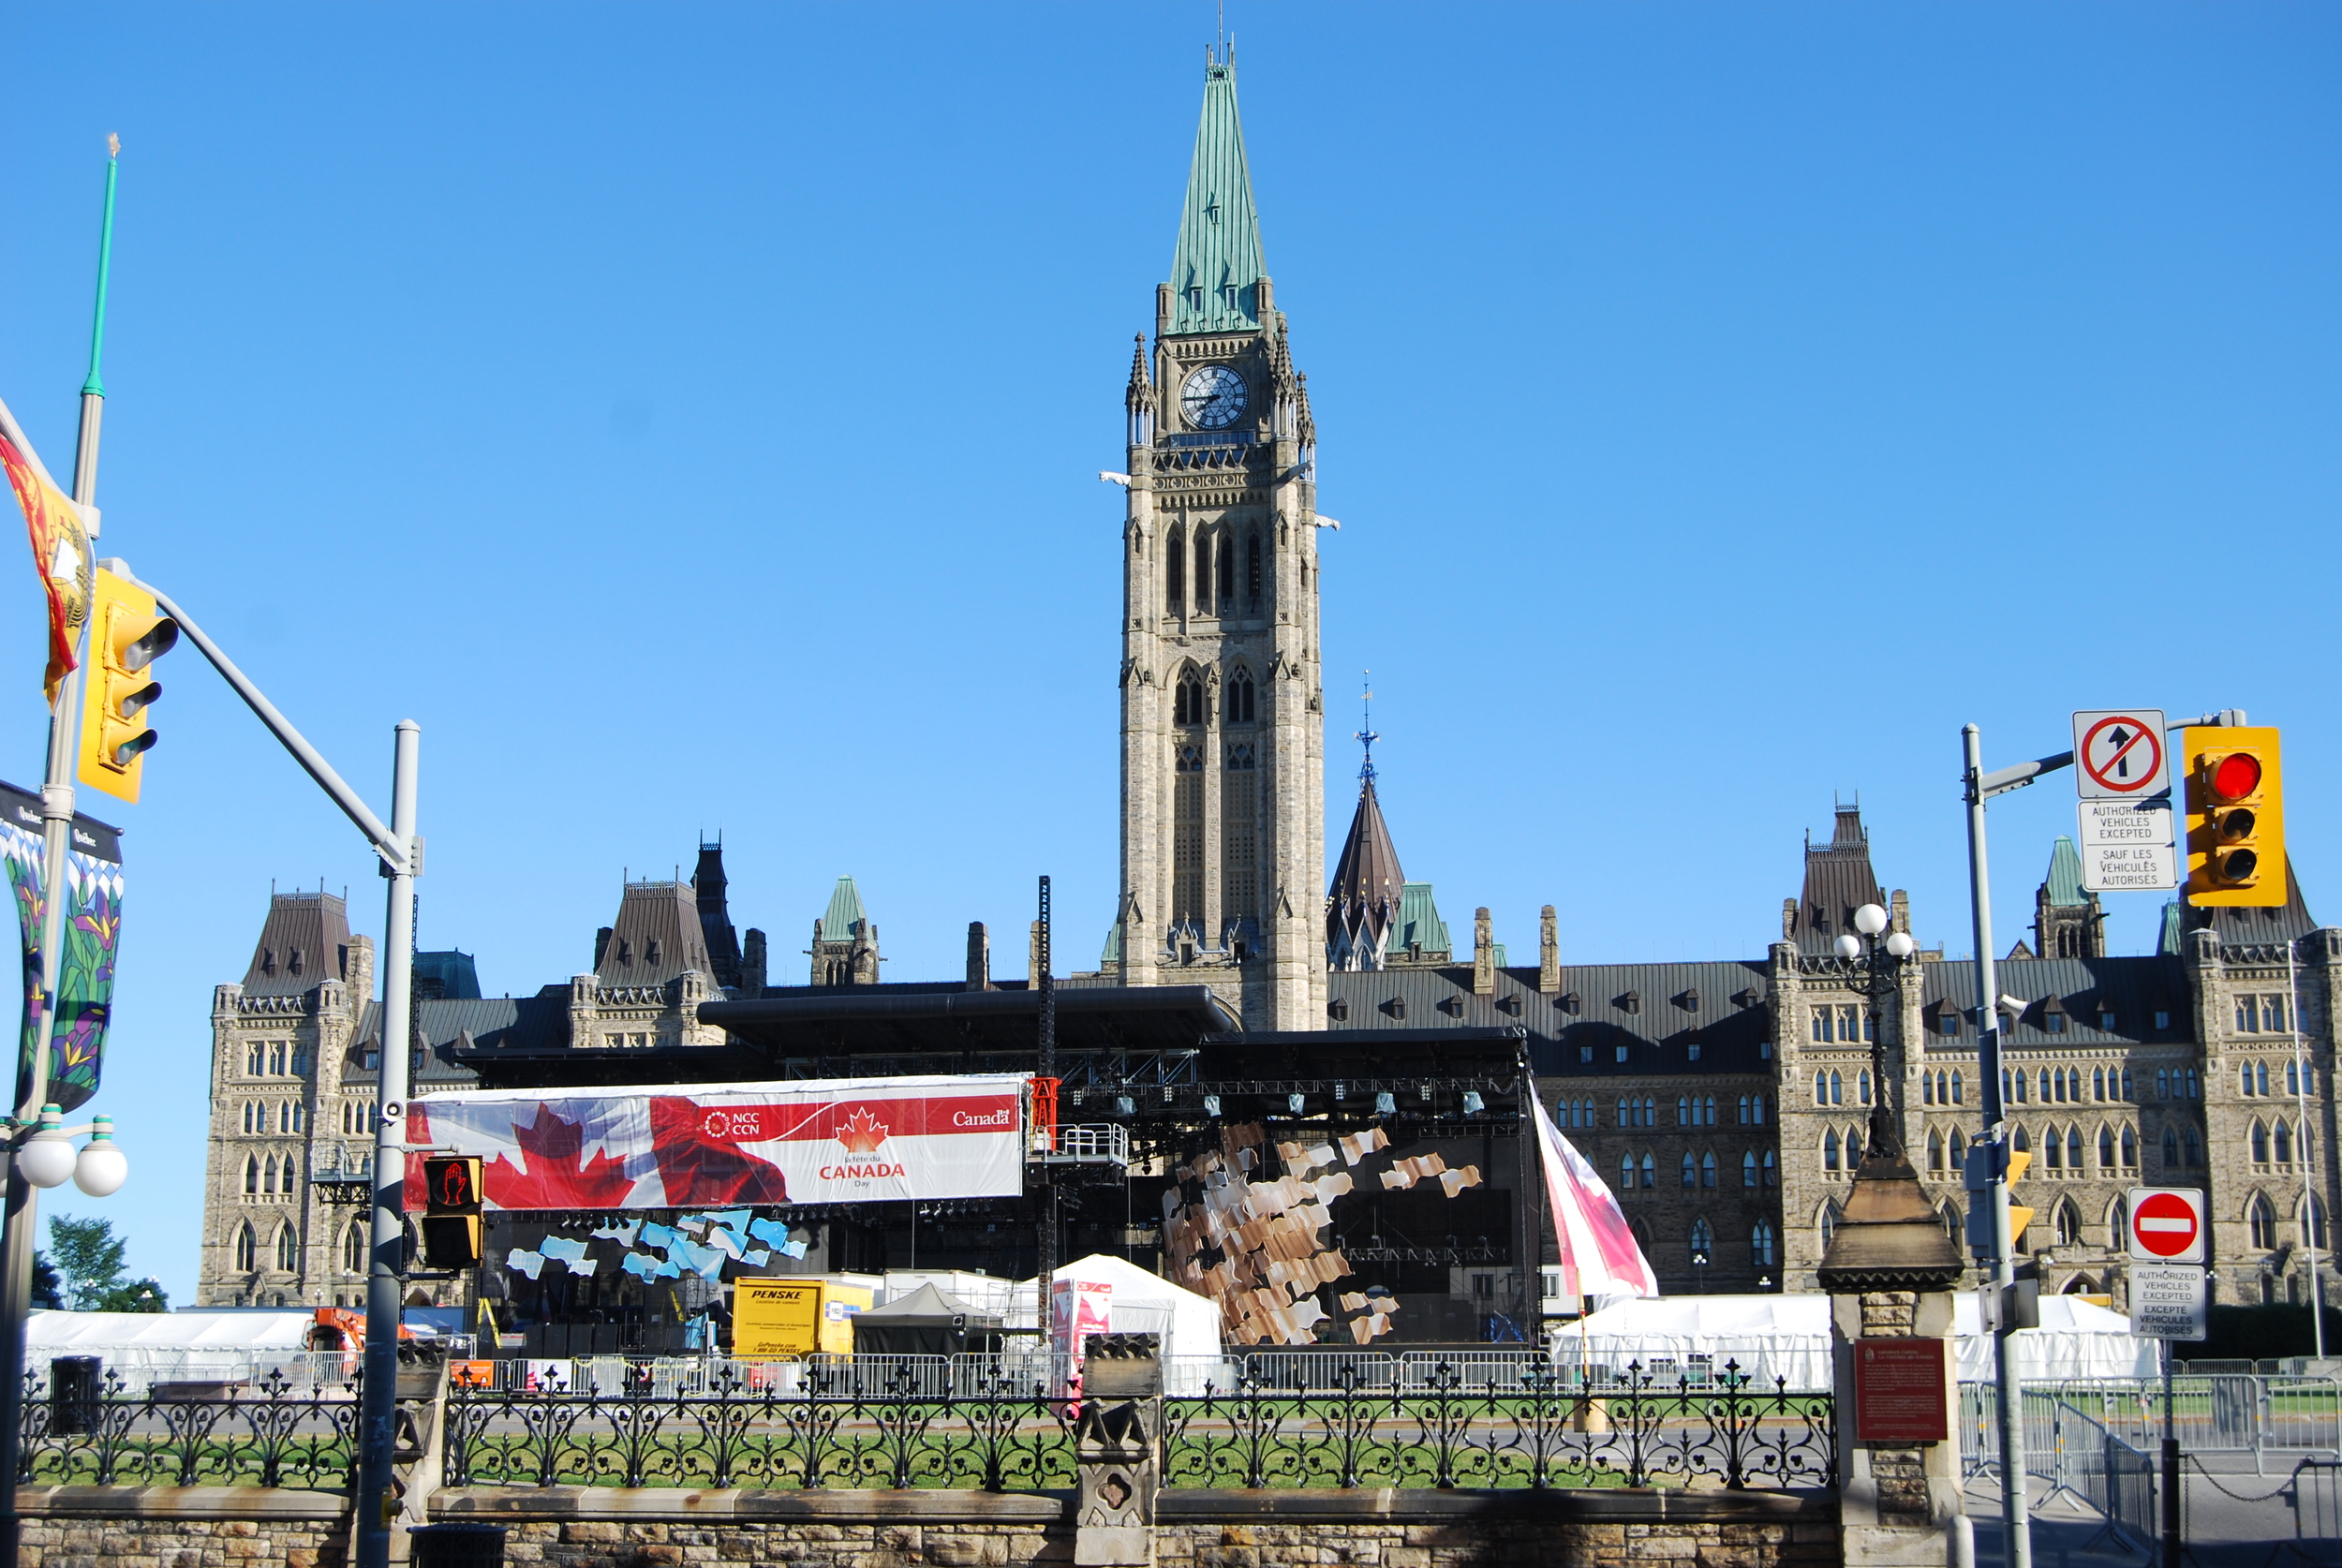 A lovely day for the December 30, 1941 speech to depart Canada's Parliament